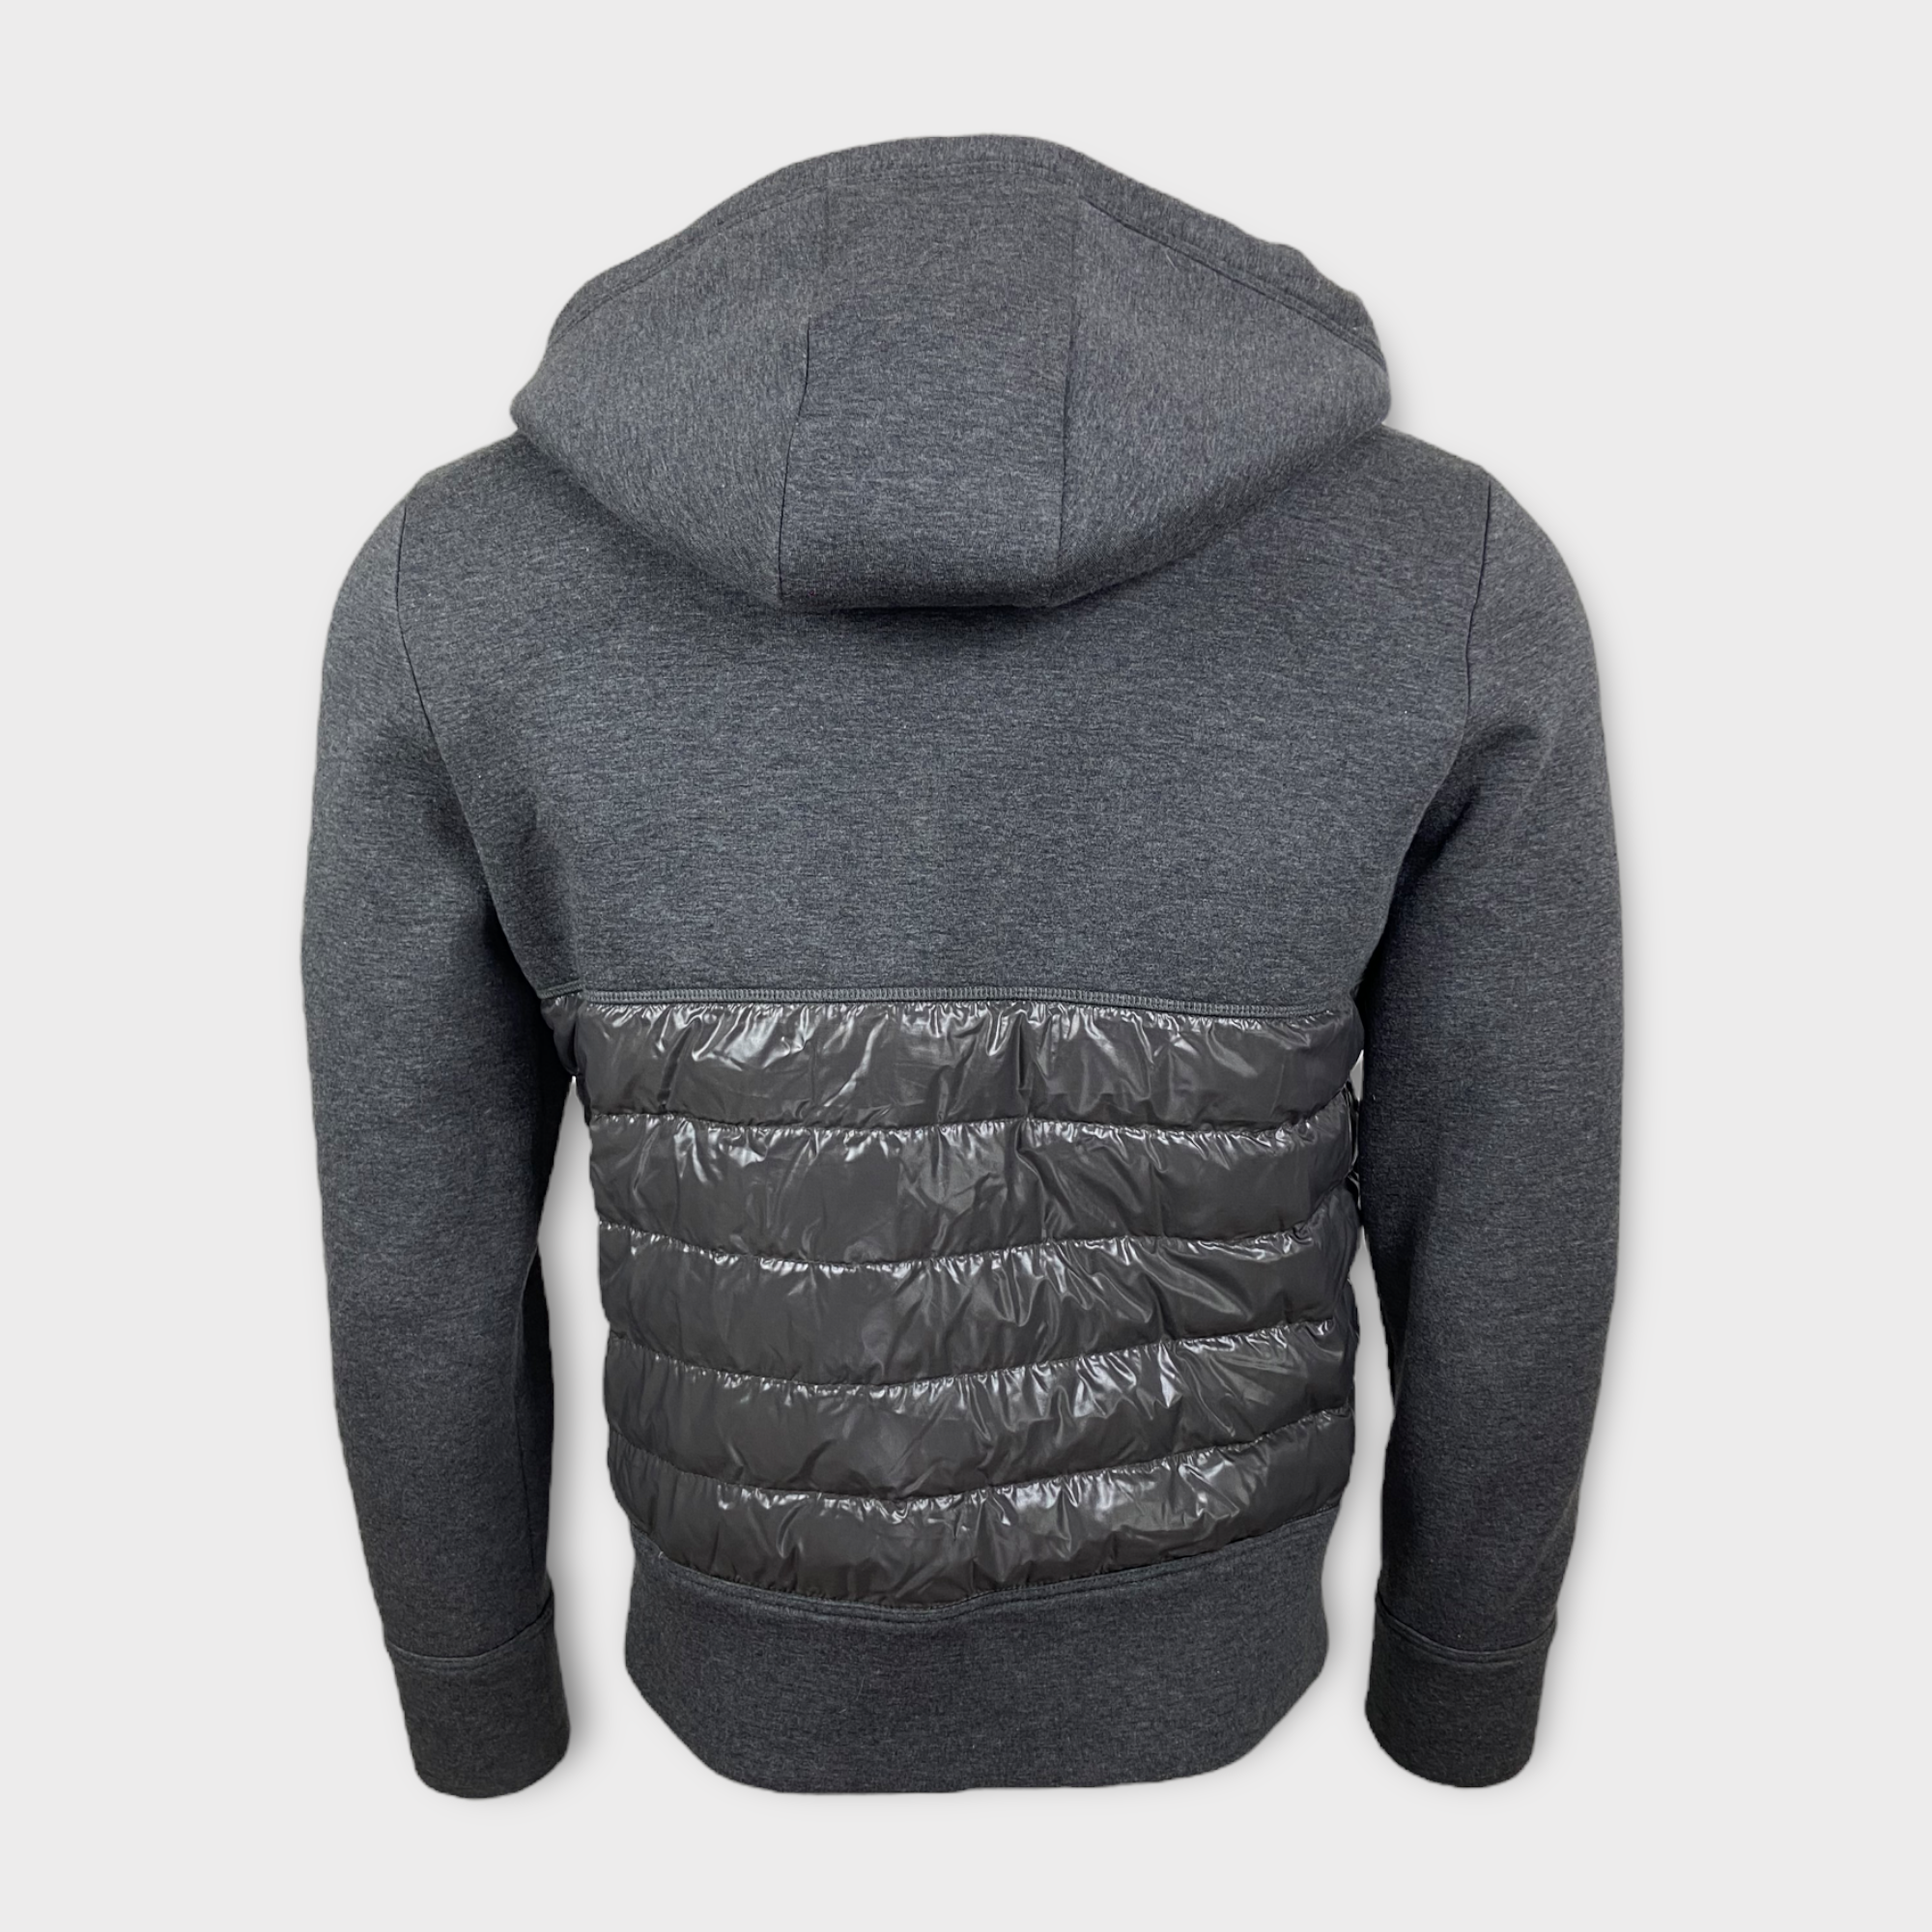 Moncler Hooded Down Cardigan - Size M (Fits S/M)